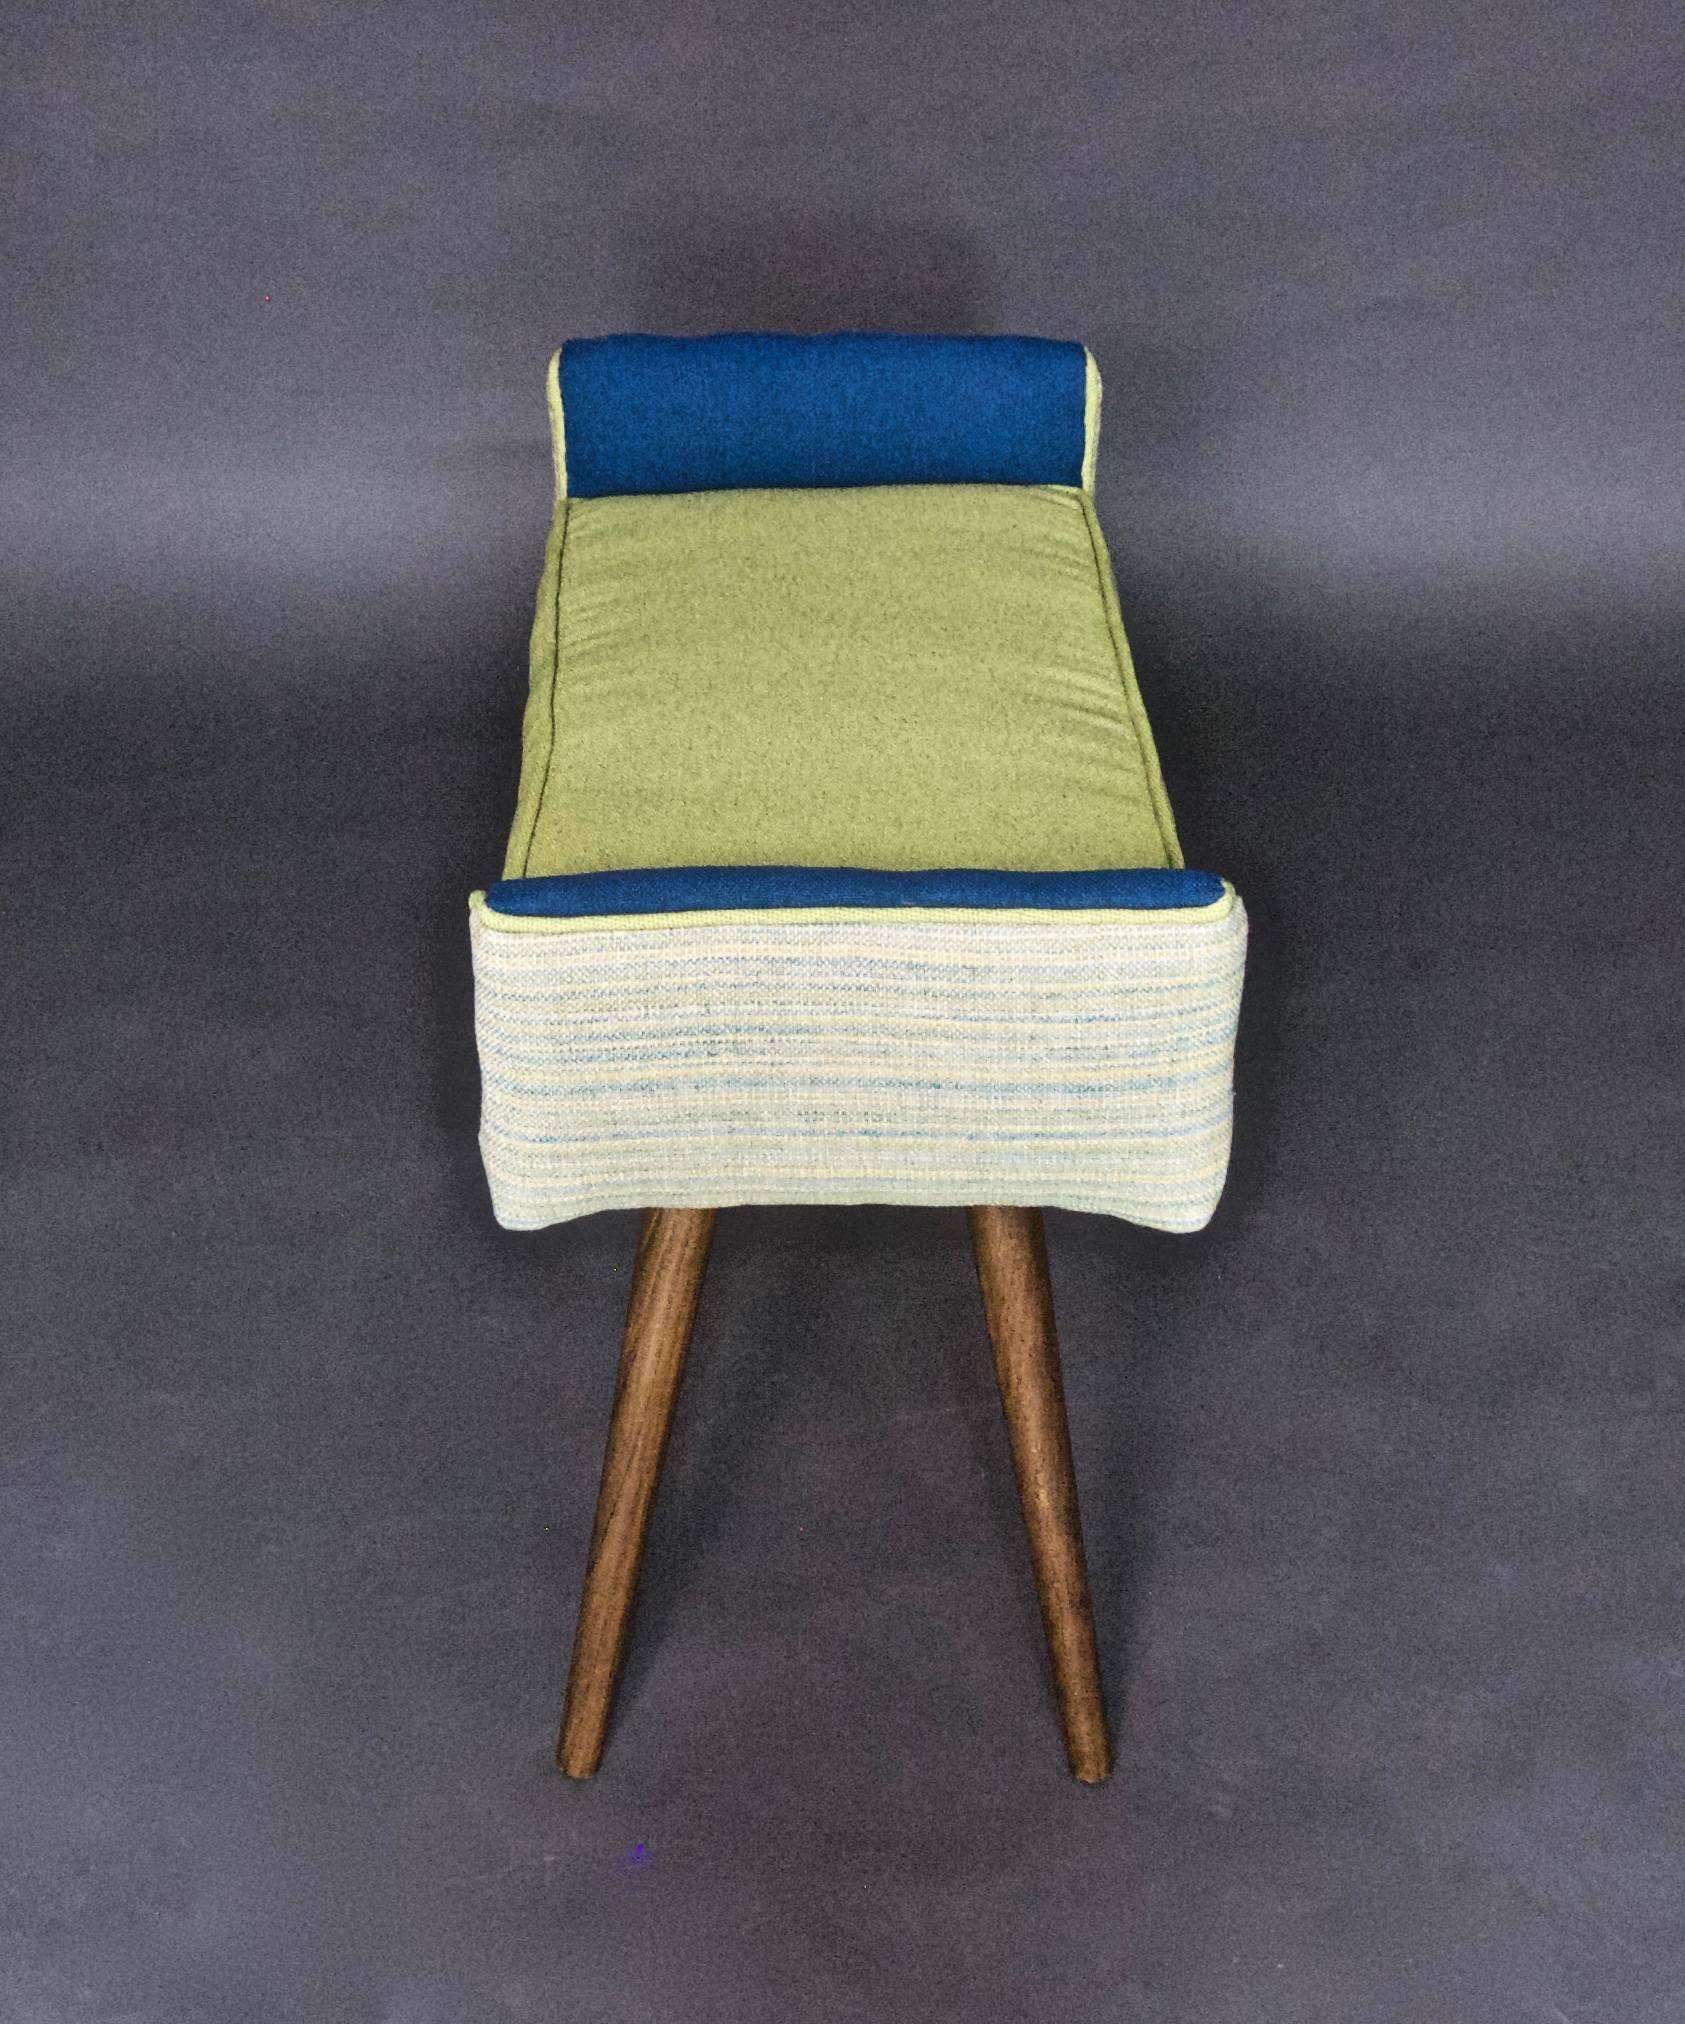 Contemporary Studio Series: Backless Vanity Size Stool, Spring Linen Leaf Green Seat-in stock For Sale